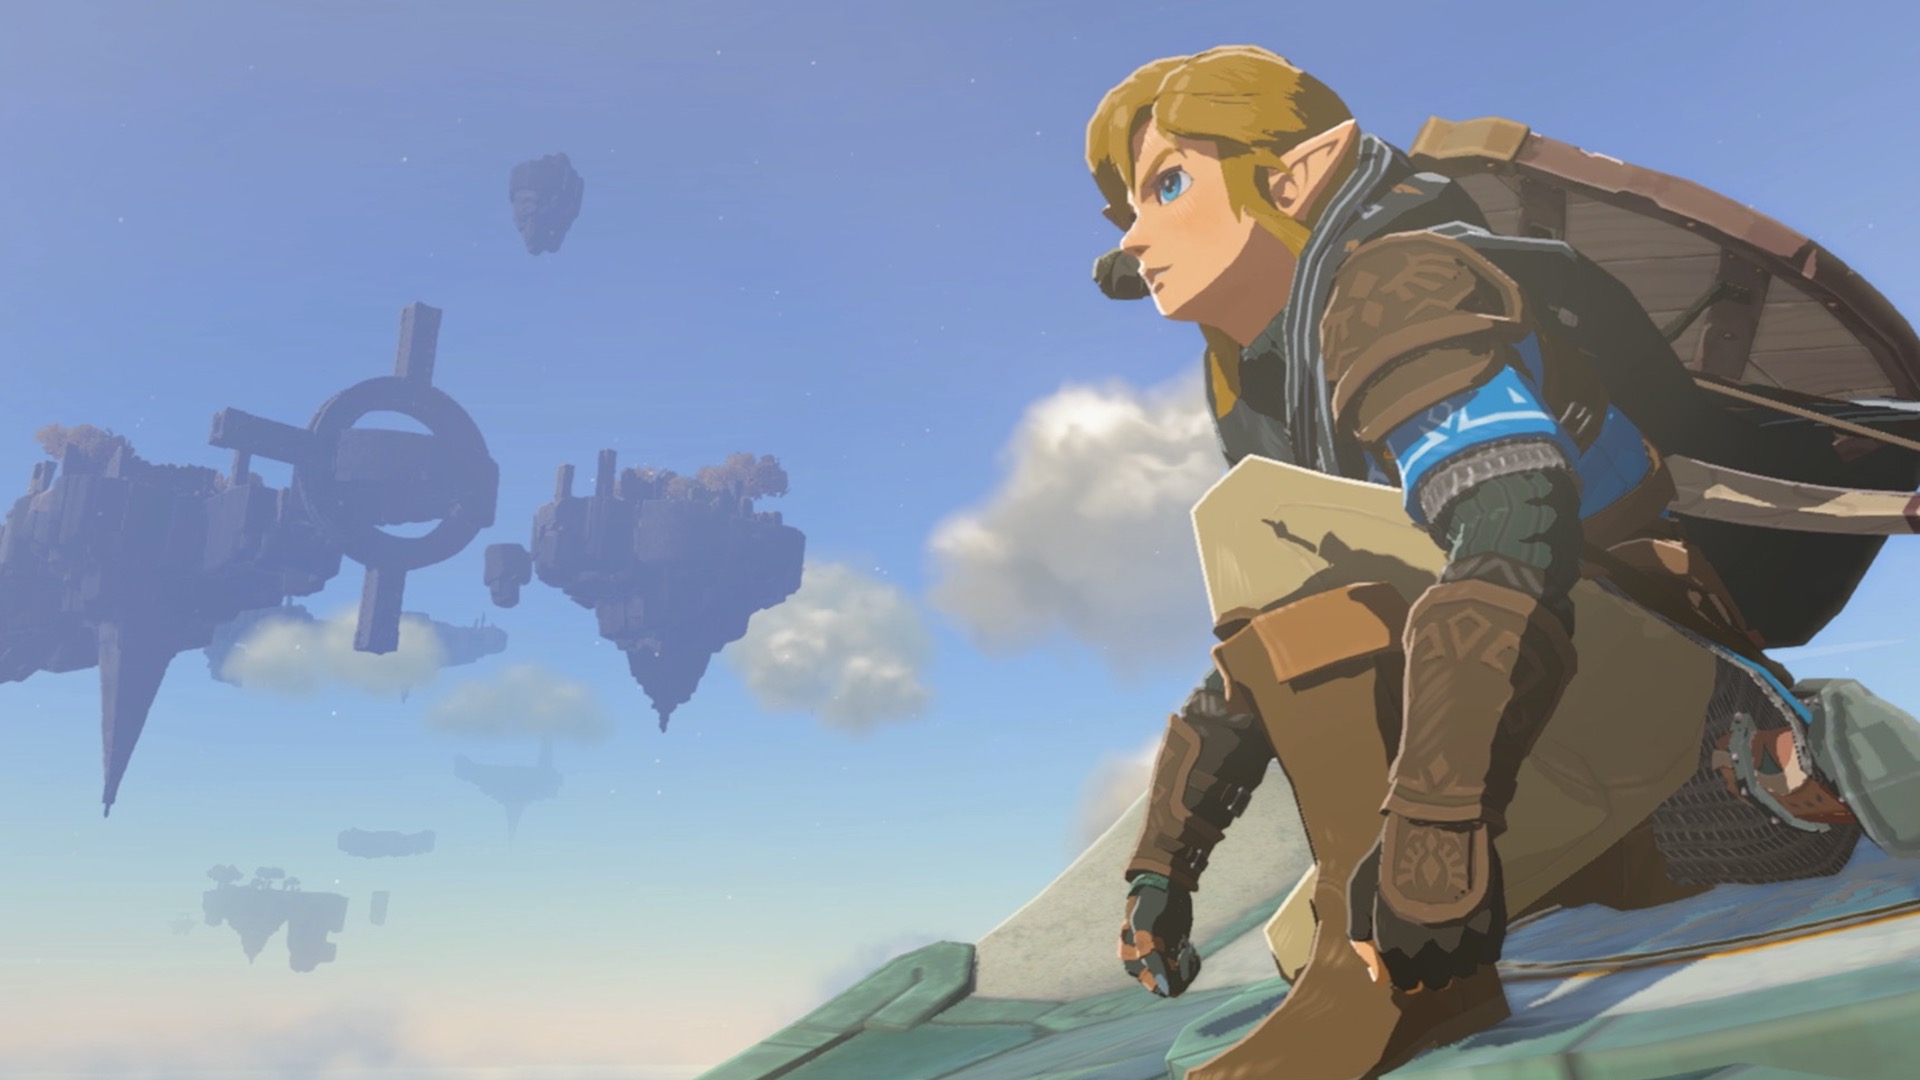 Link crouches, looking out over Hyrule. A sky island can be seen floating in the background